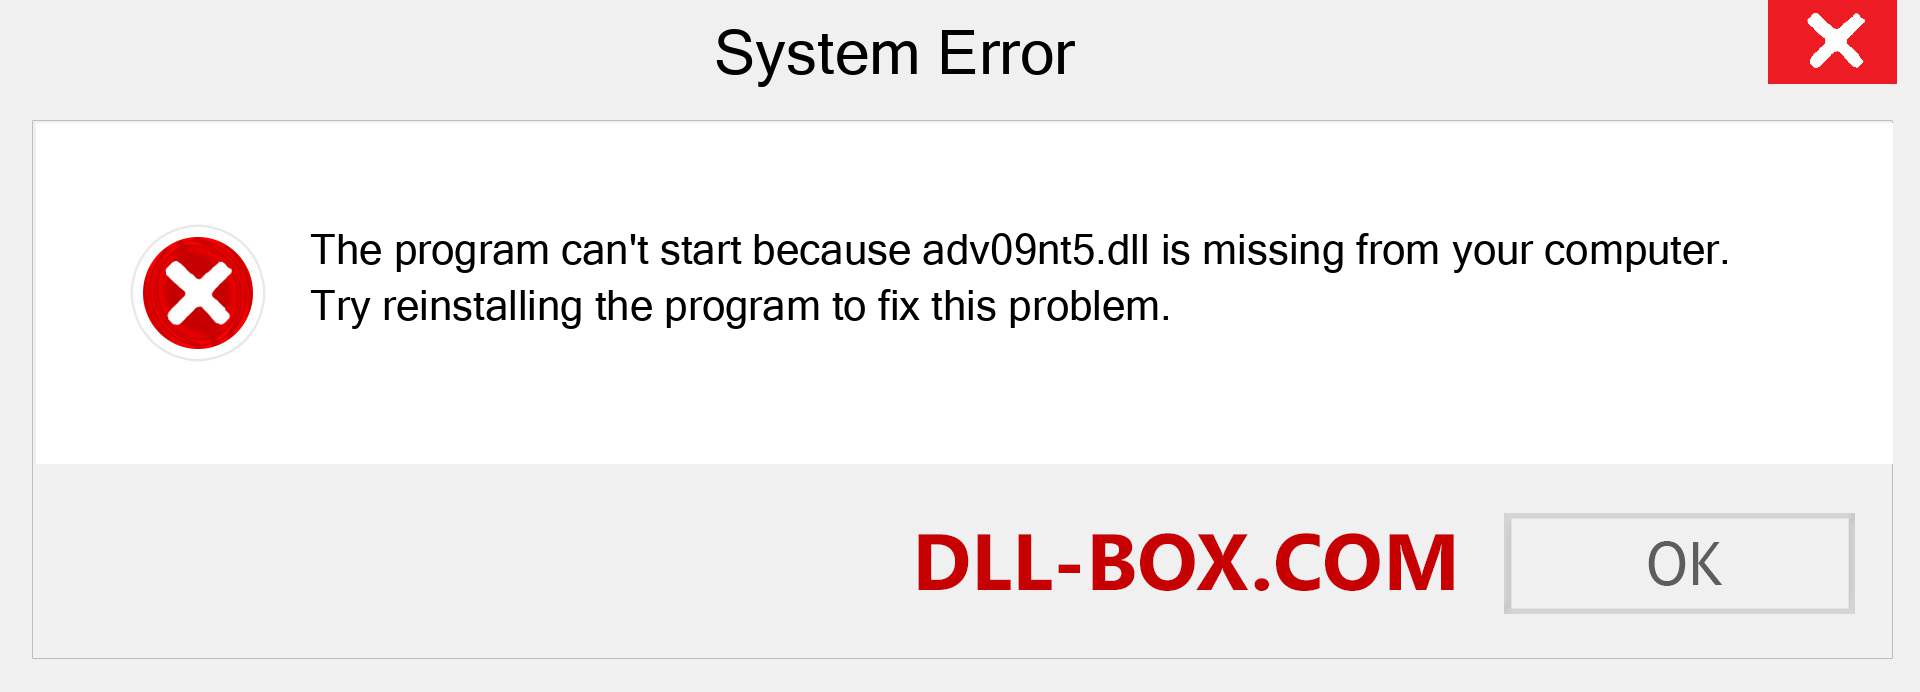  adv09nt5.dll file is missing?. Download for Windows 7, 8, 10 - Fix  adv09nt5 dll Missing Error on Windows, photos, images